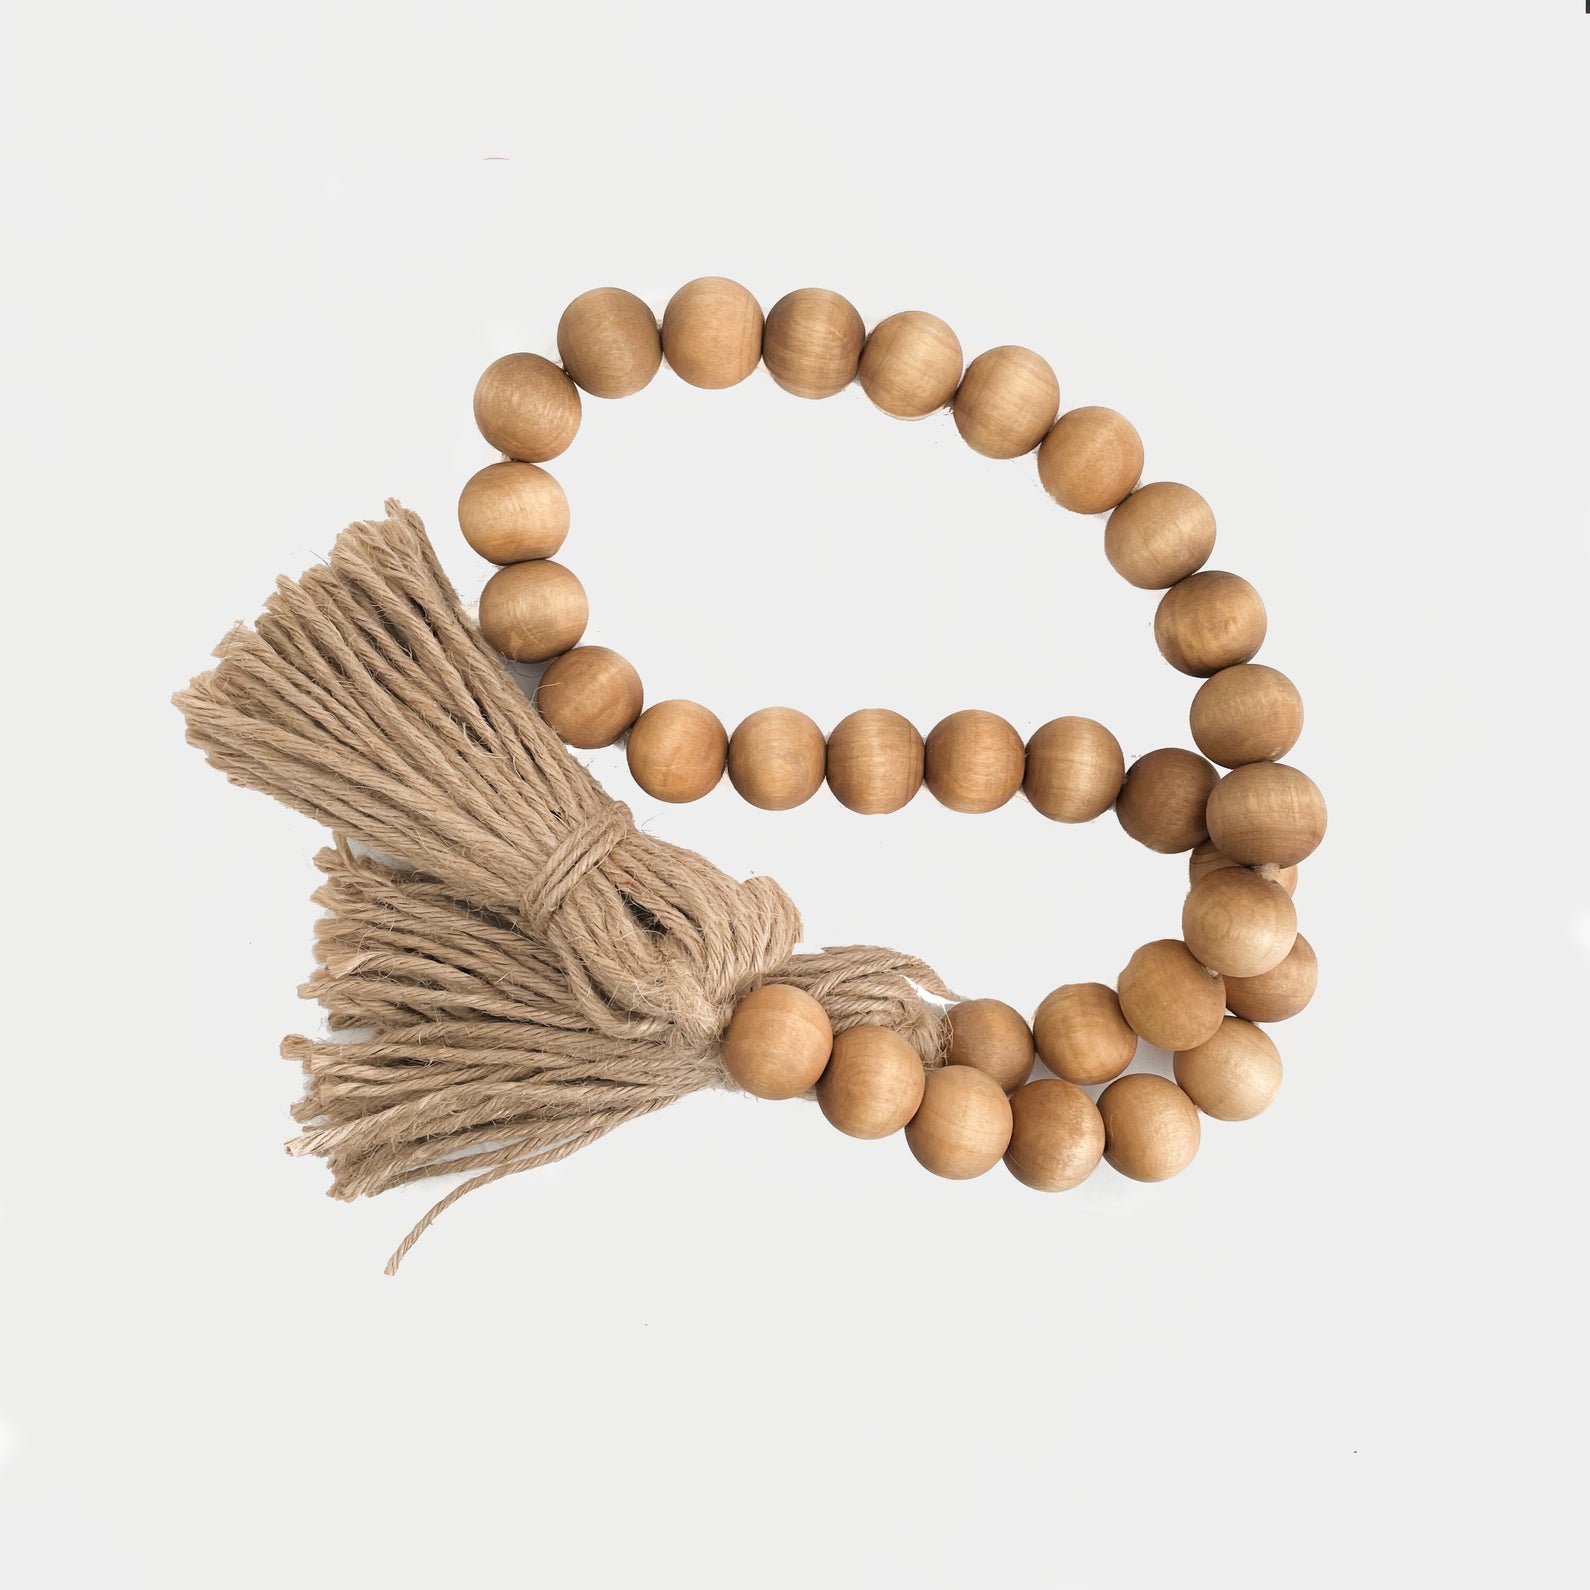  Innovative Offer 170 Pcs Wooden Beads with Jute Twine